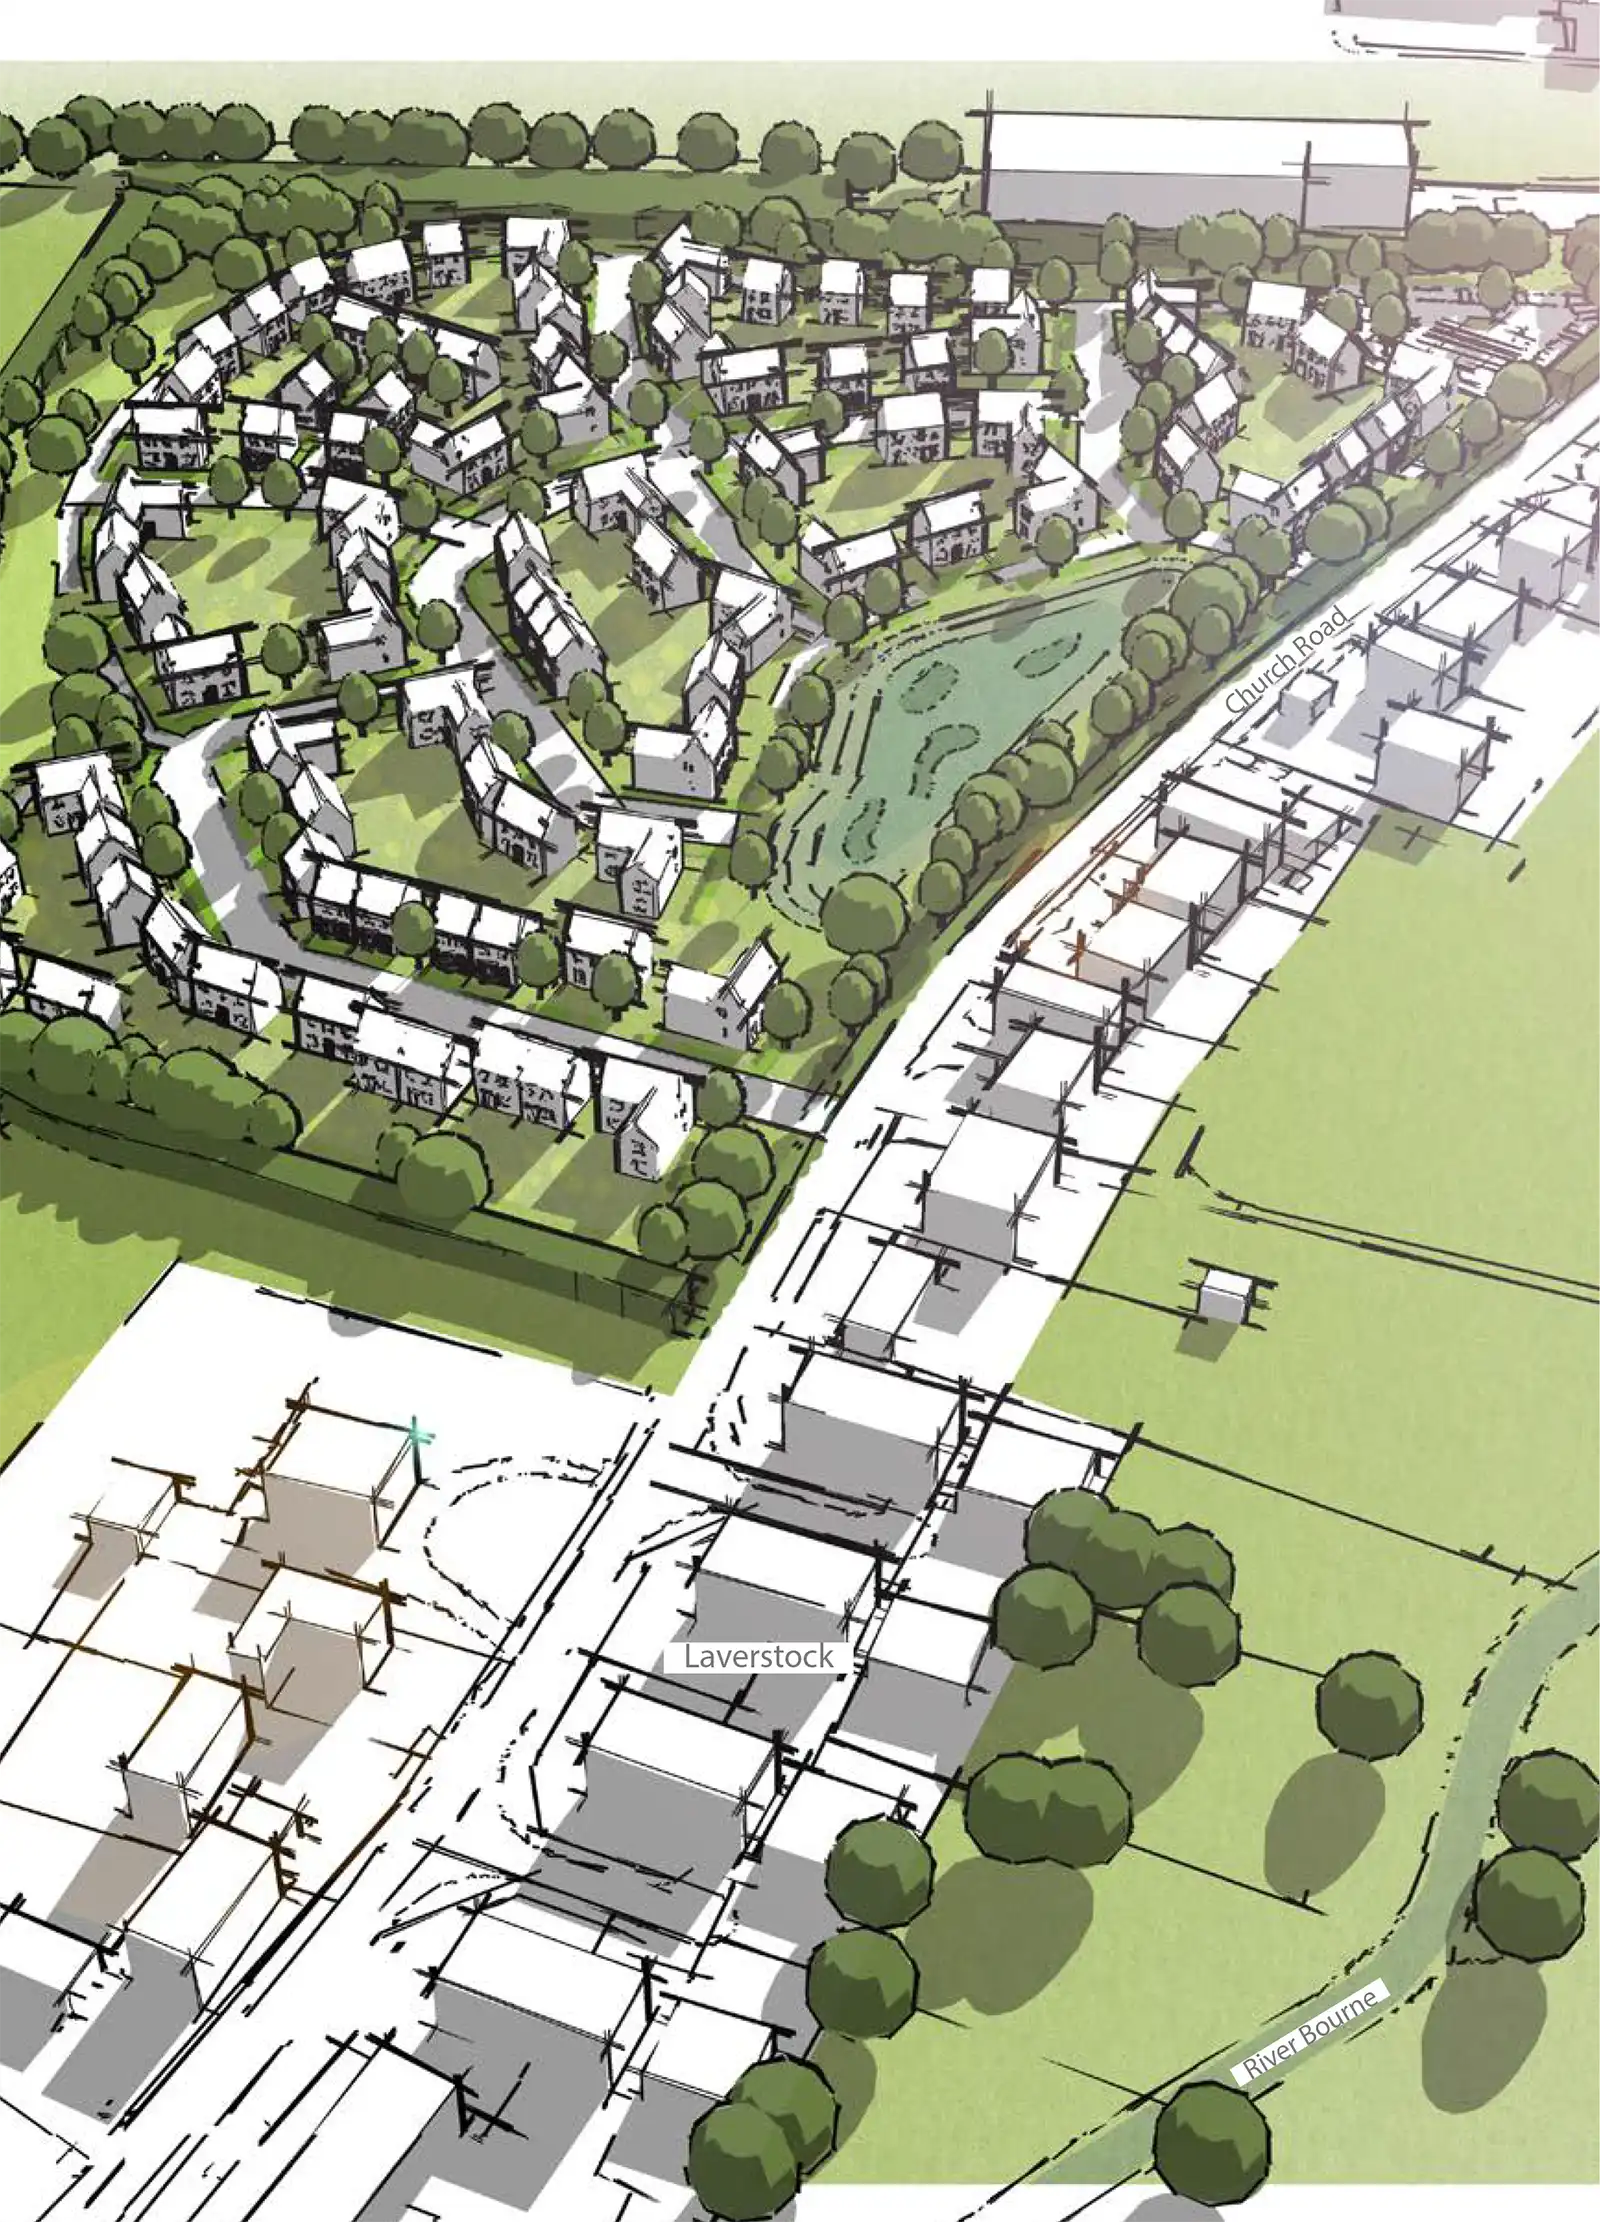 How the new development could look. Picture: Hallam Land Management